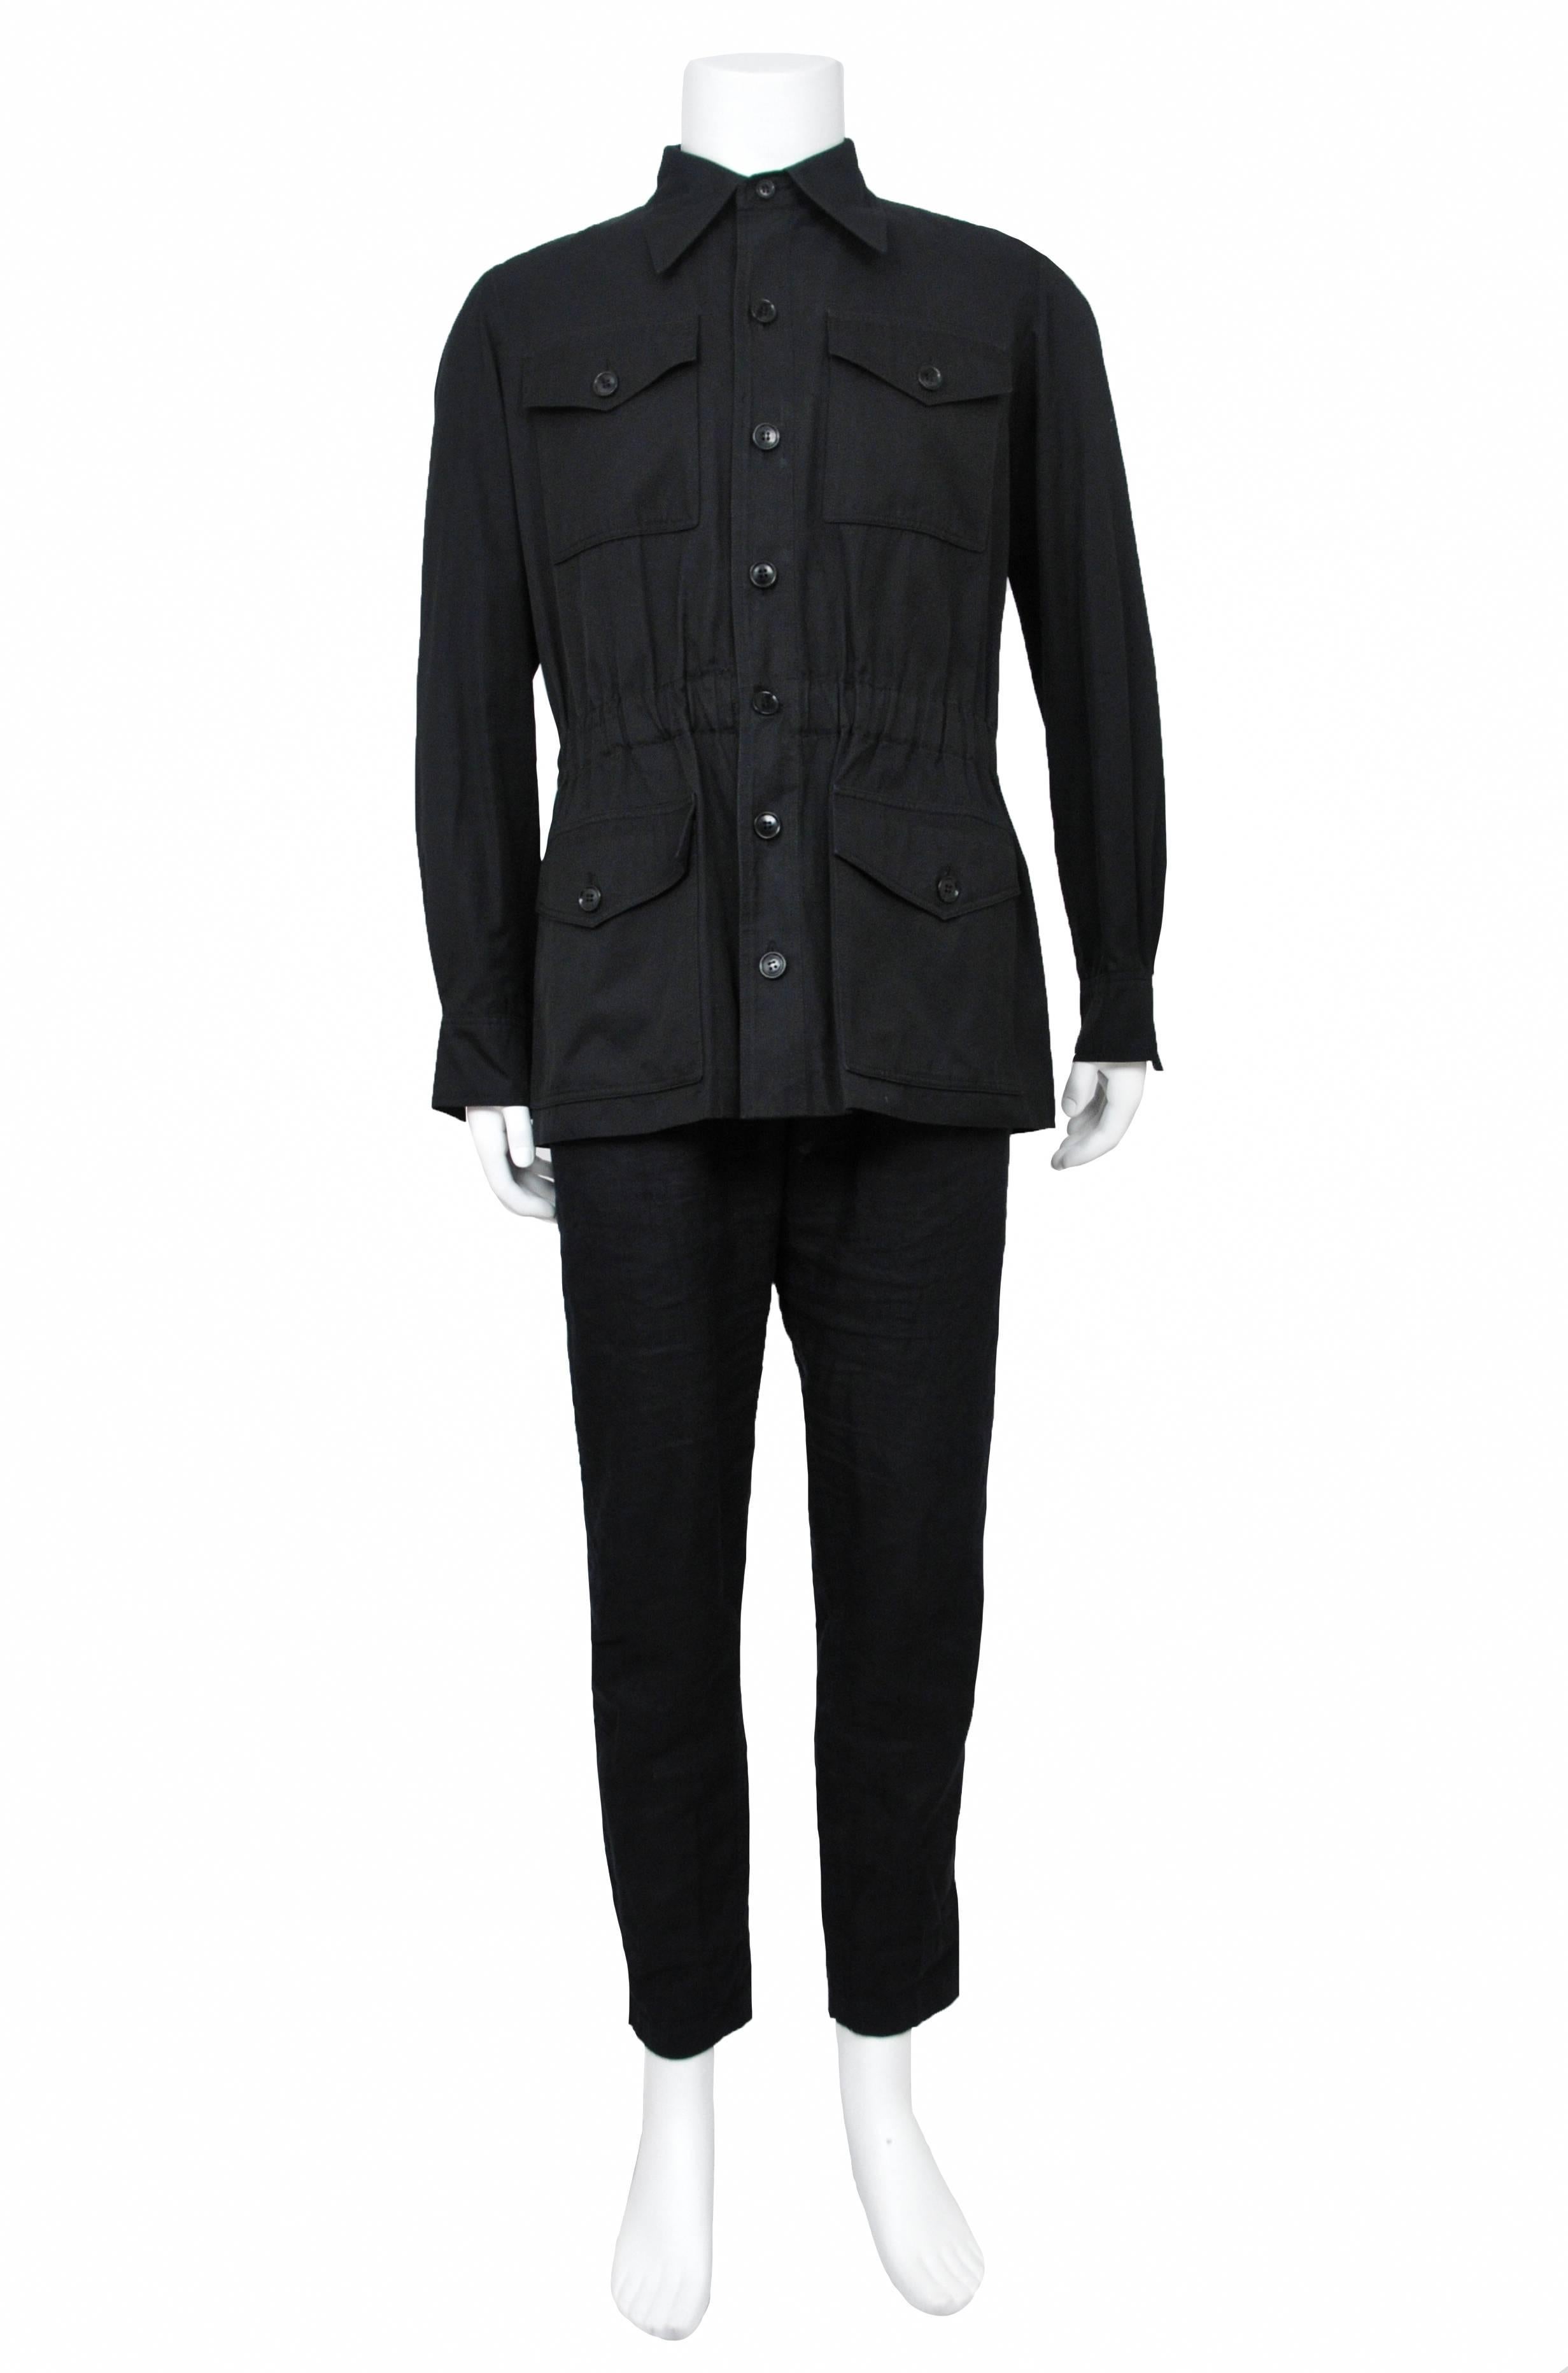 Vintage Yves Saint Laurent mens black iconic collared safari jacket featuring button front pockets at the chest and hips and elastic at the waist.
Please inquire for additional images.